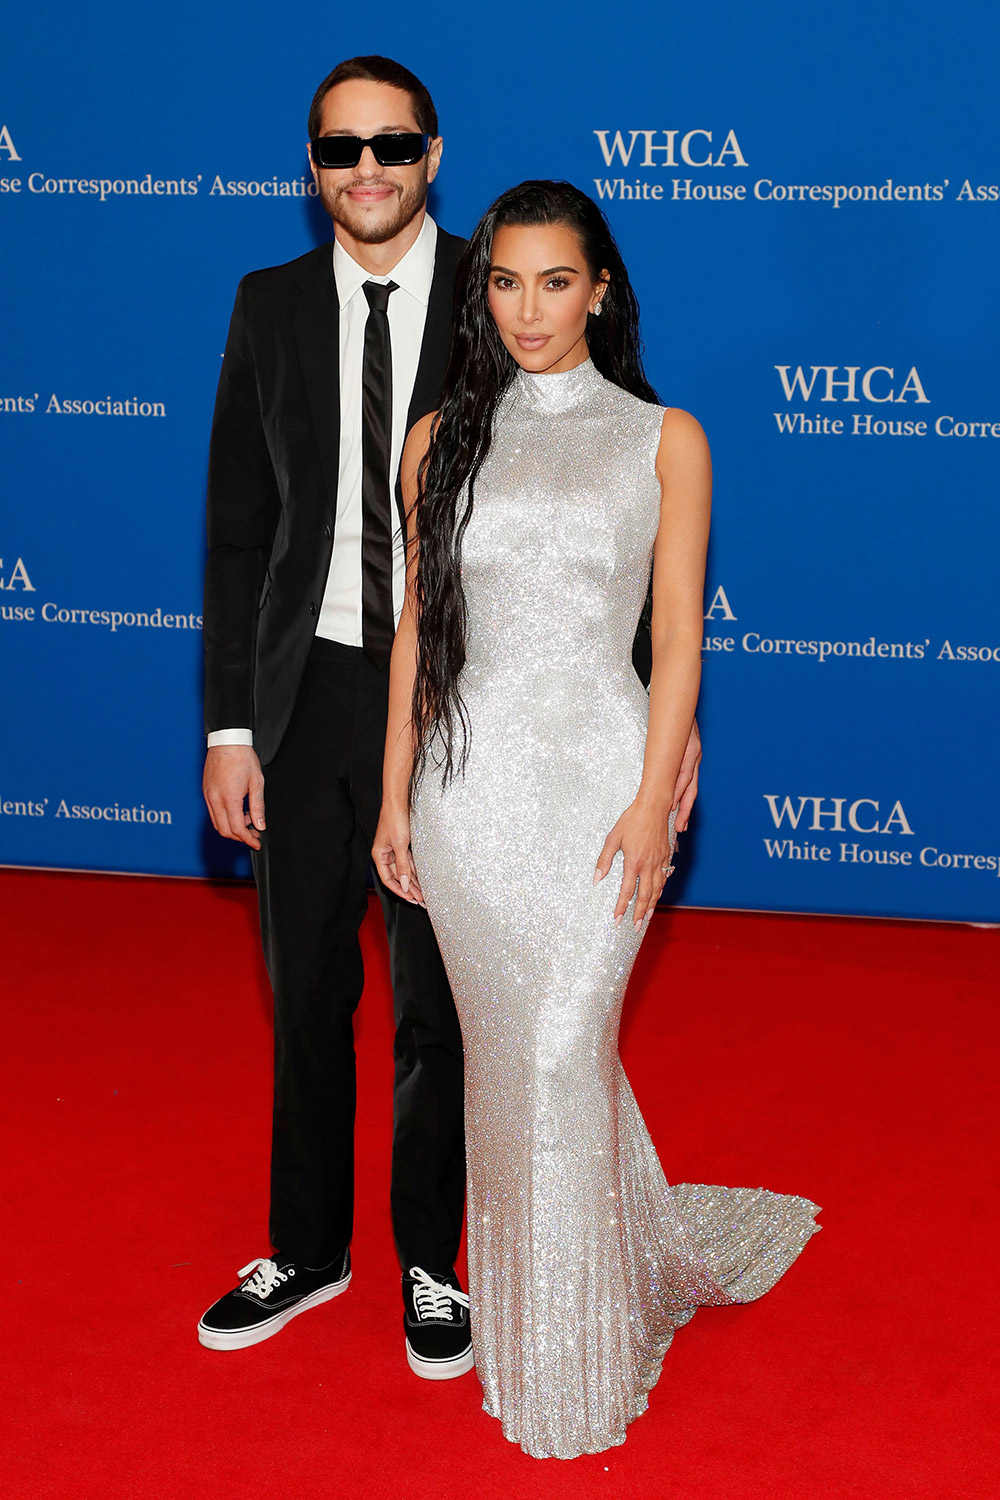 Kim Kardashian first walked with her boyfriend 13 years younger on the red carpet: Looking like a queen and bodyguard, attention was focused on the man's hand - Photo 2.